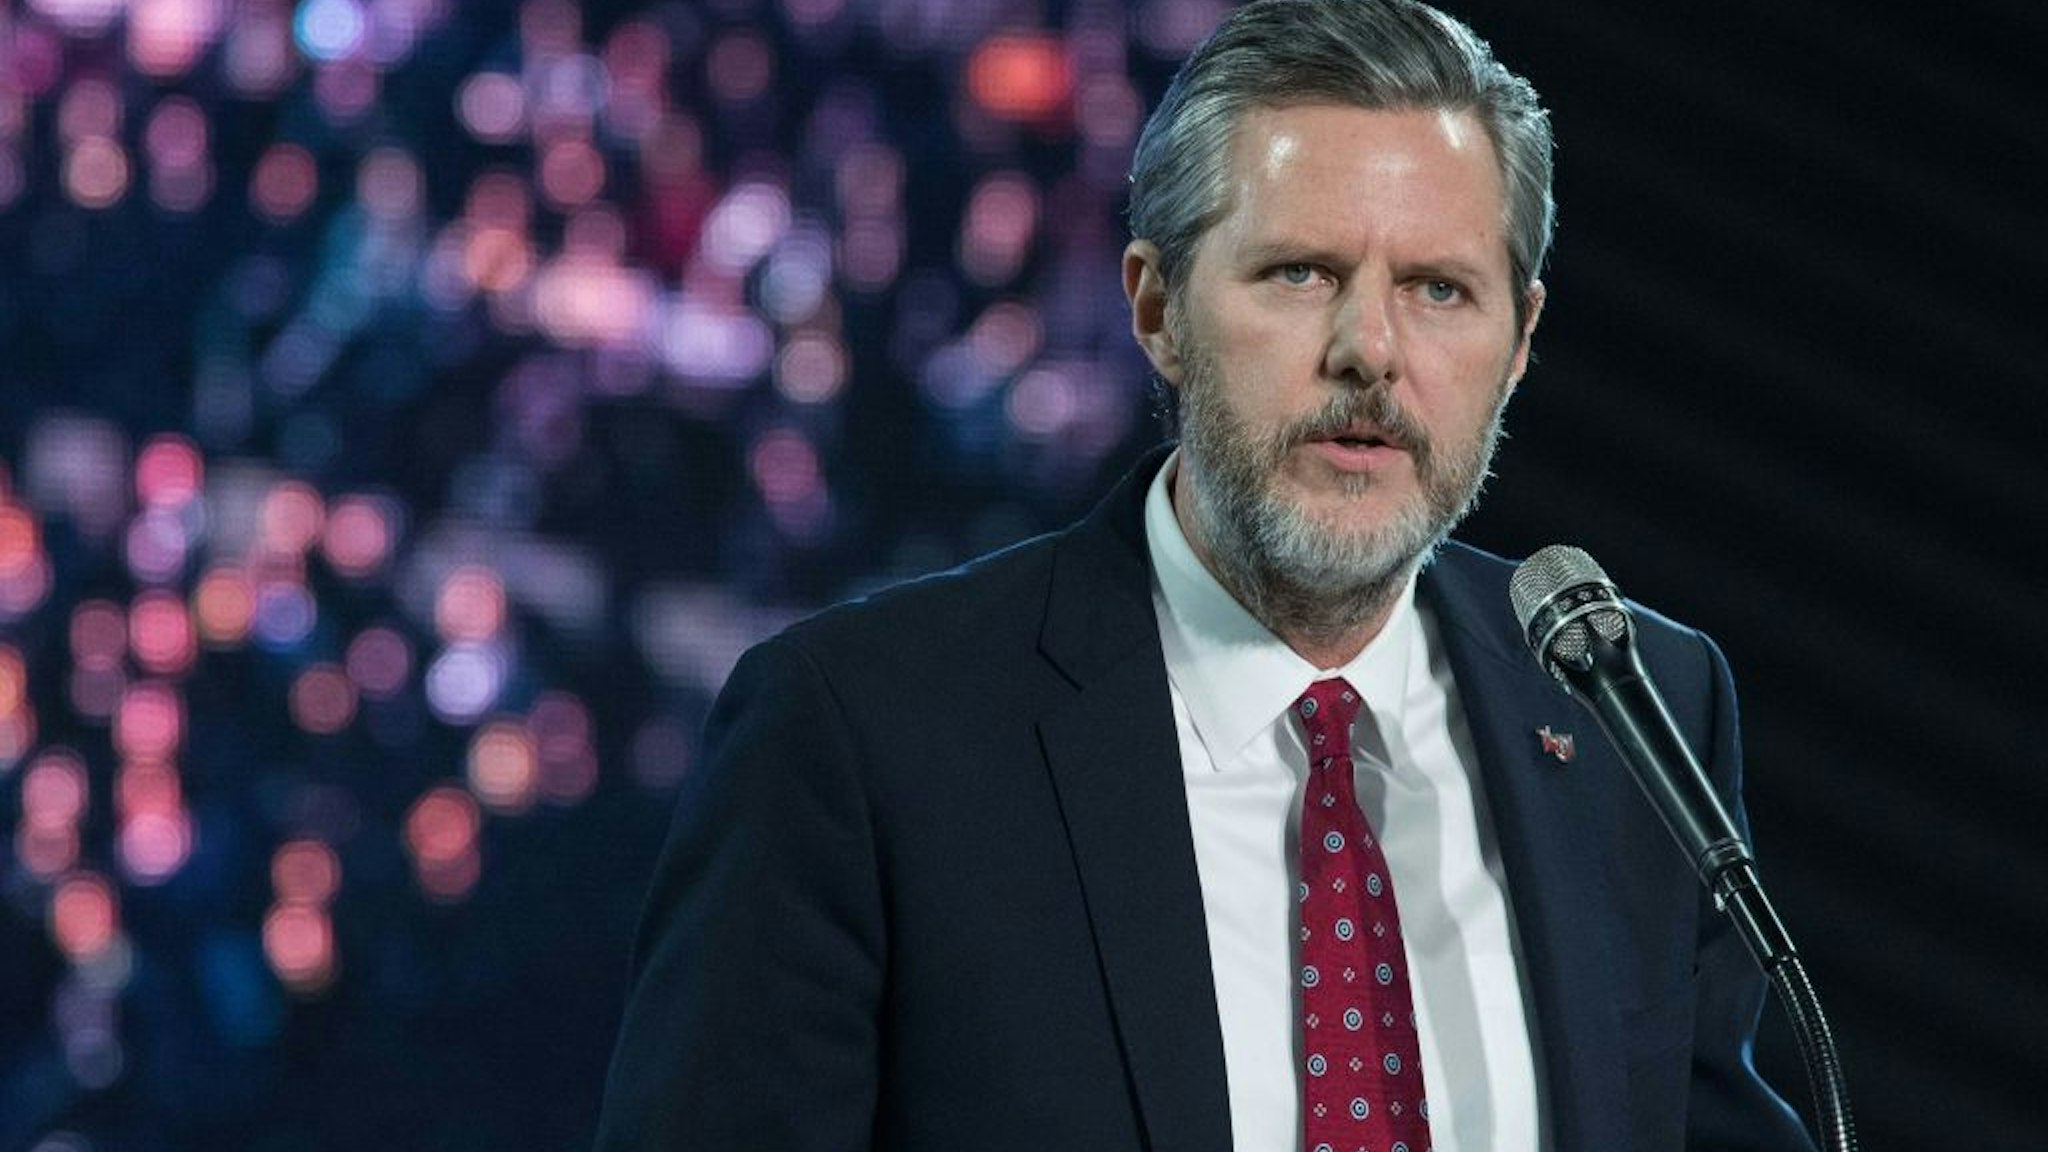 Liberty University president Jerry Falwell Jr. introduces US Republican presidential candidate Donald Trump at a rally at Liberty University, the world's largest Christian university, in Lynchburg, Virginia, on January 18, 2016.